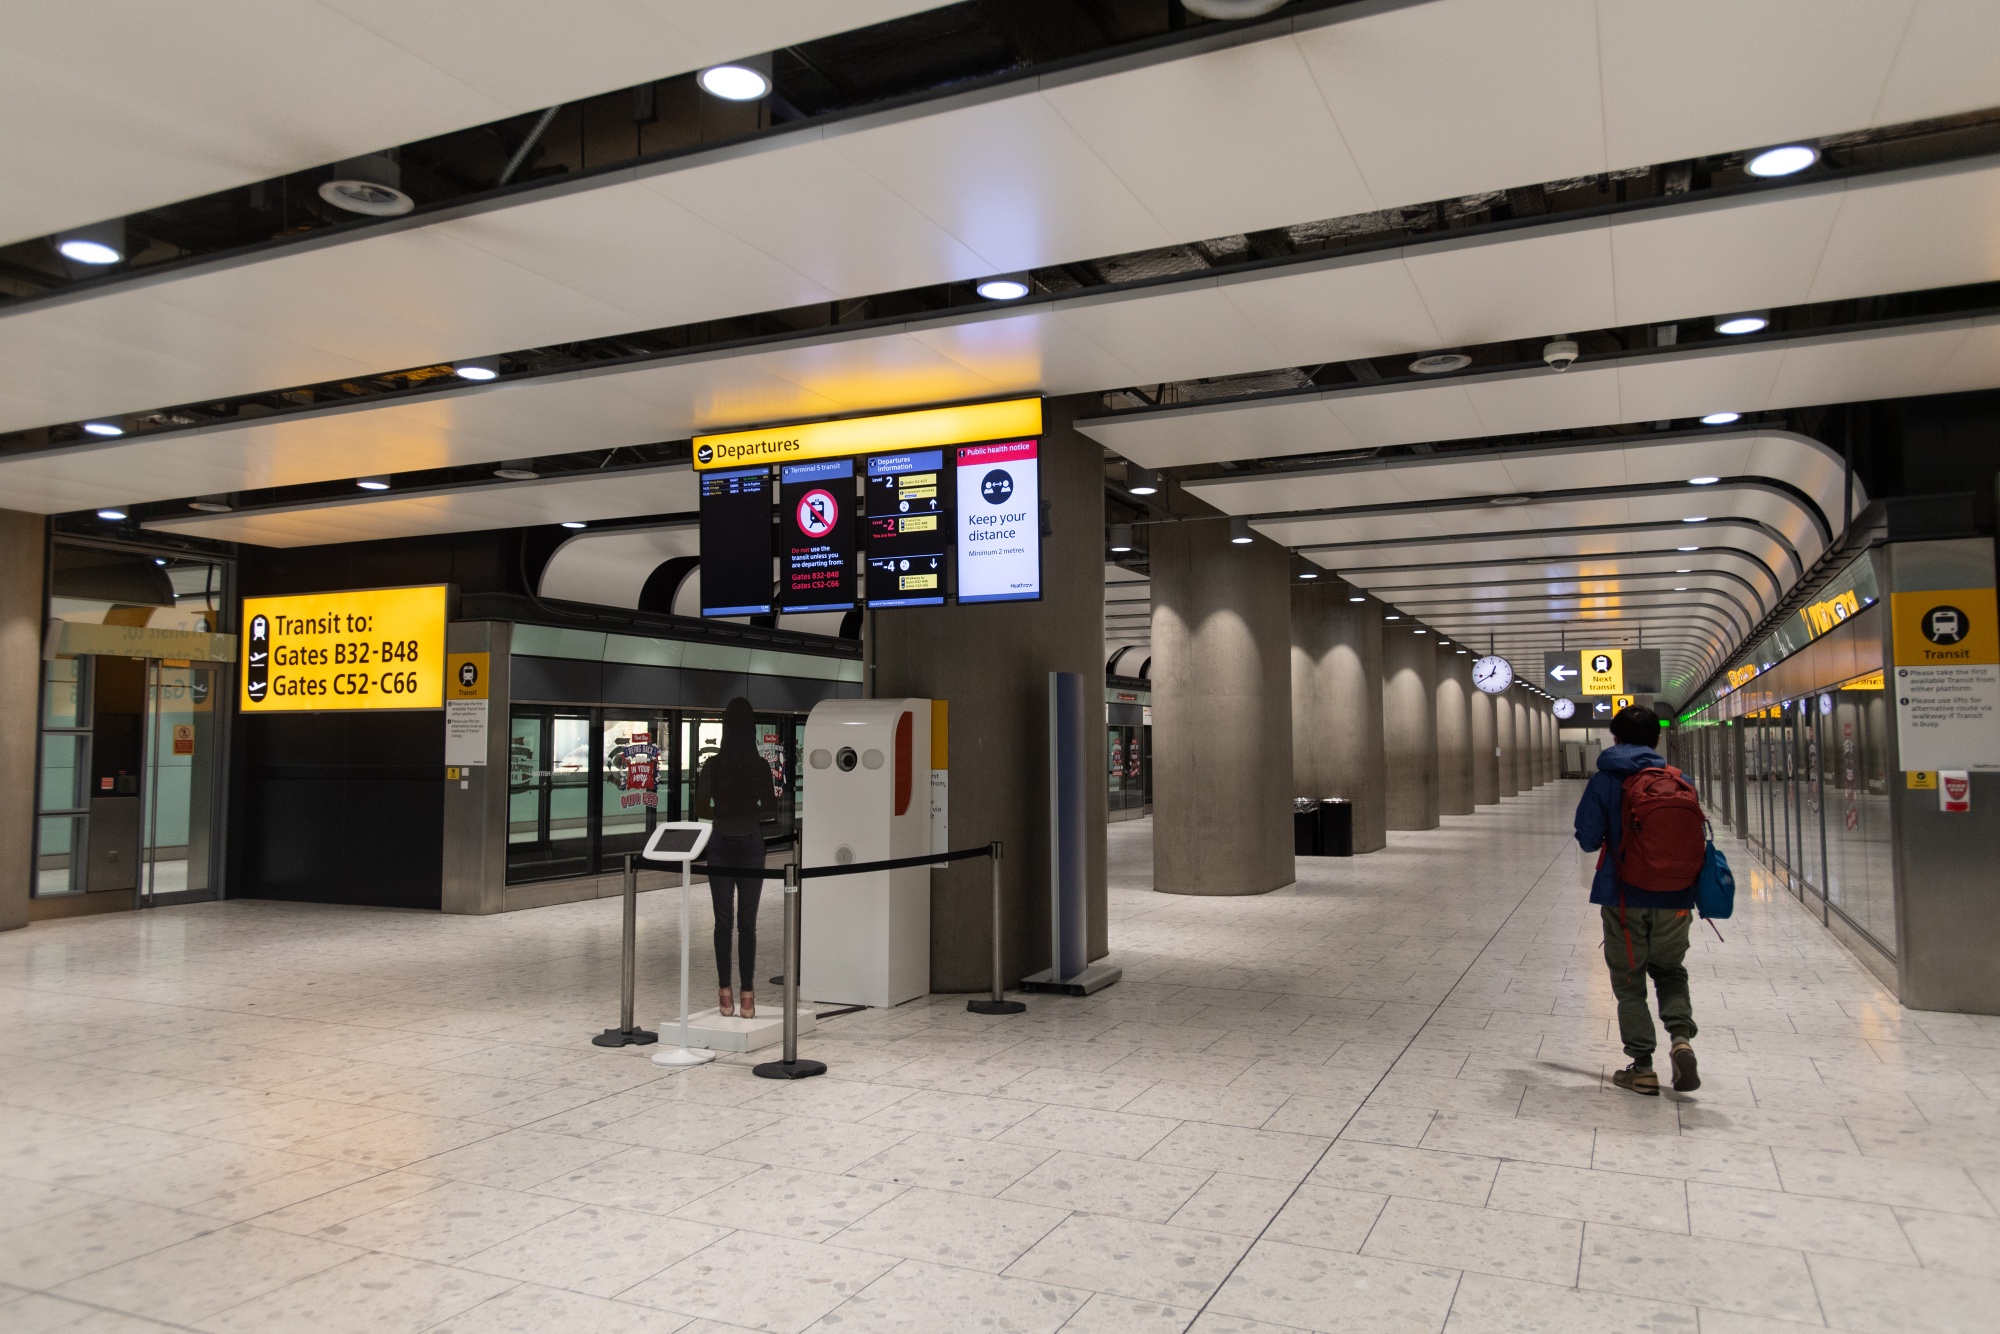 London's Heathrow Airport opens a terminal for 'red list' countries like  India